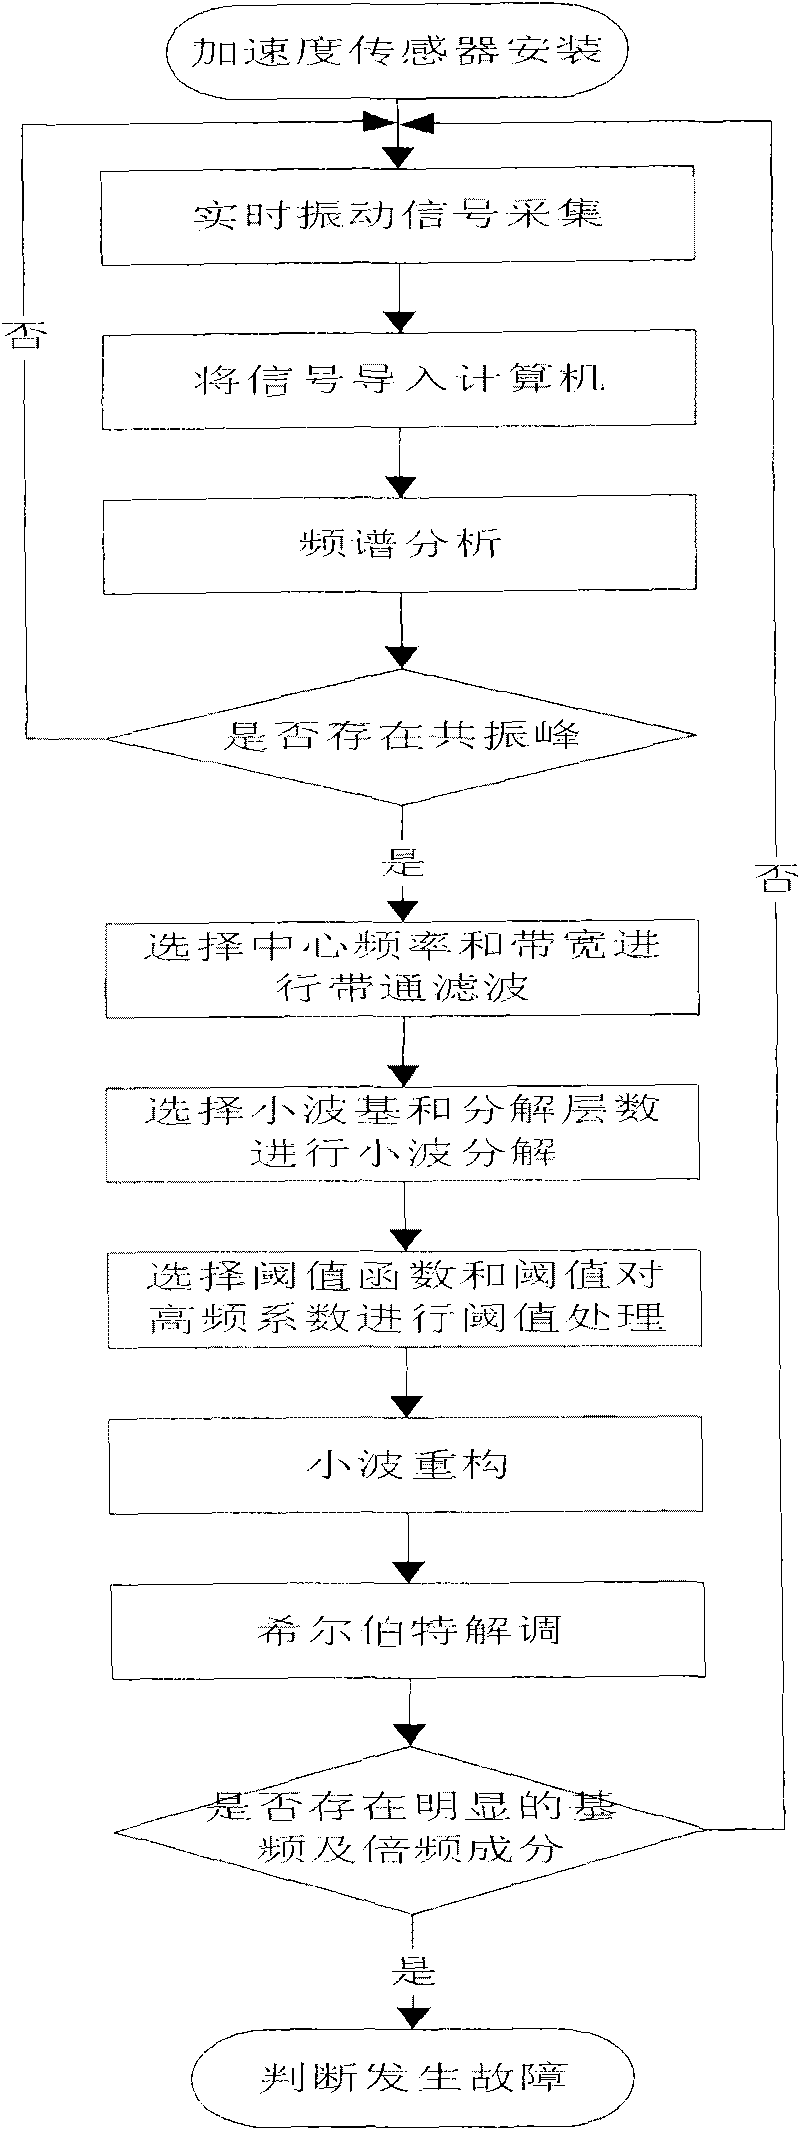 Method of fault diagnosis on ball socketed bearing of steel-making converter by comprehensive analysis